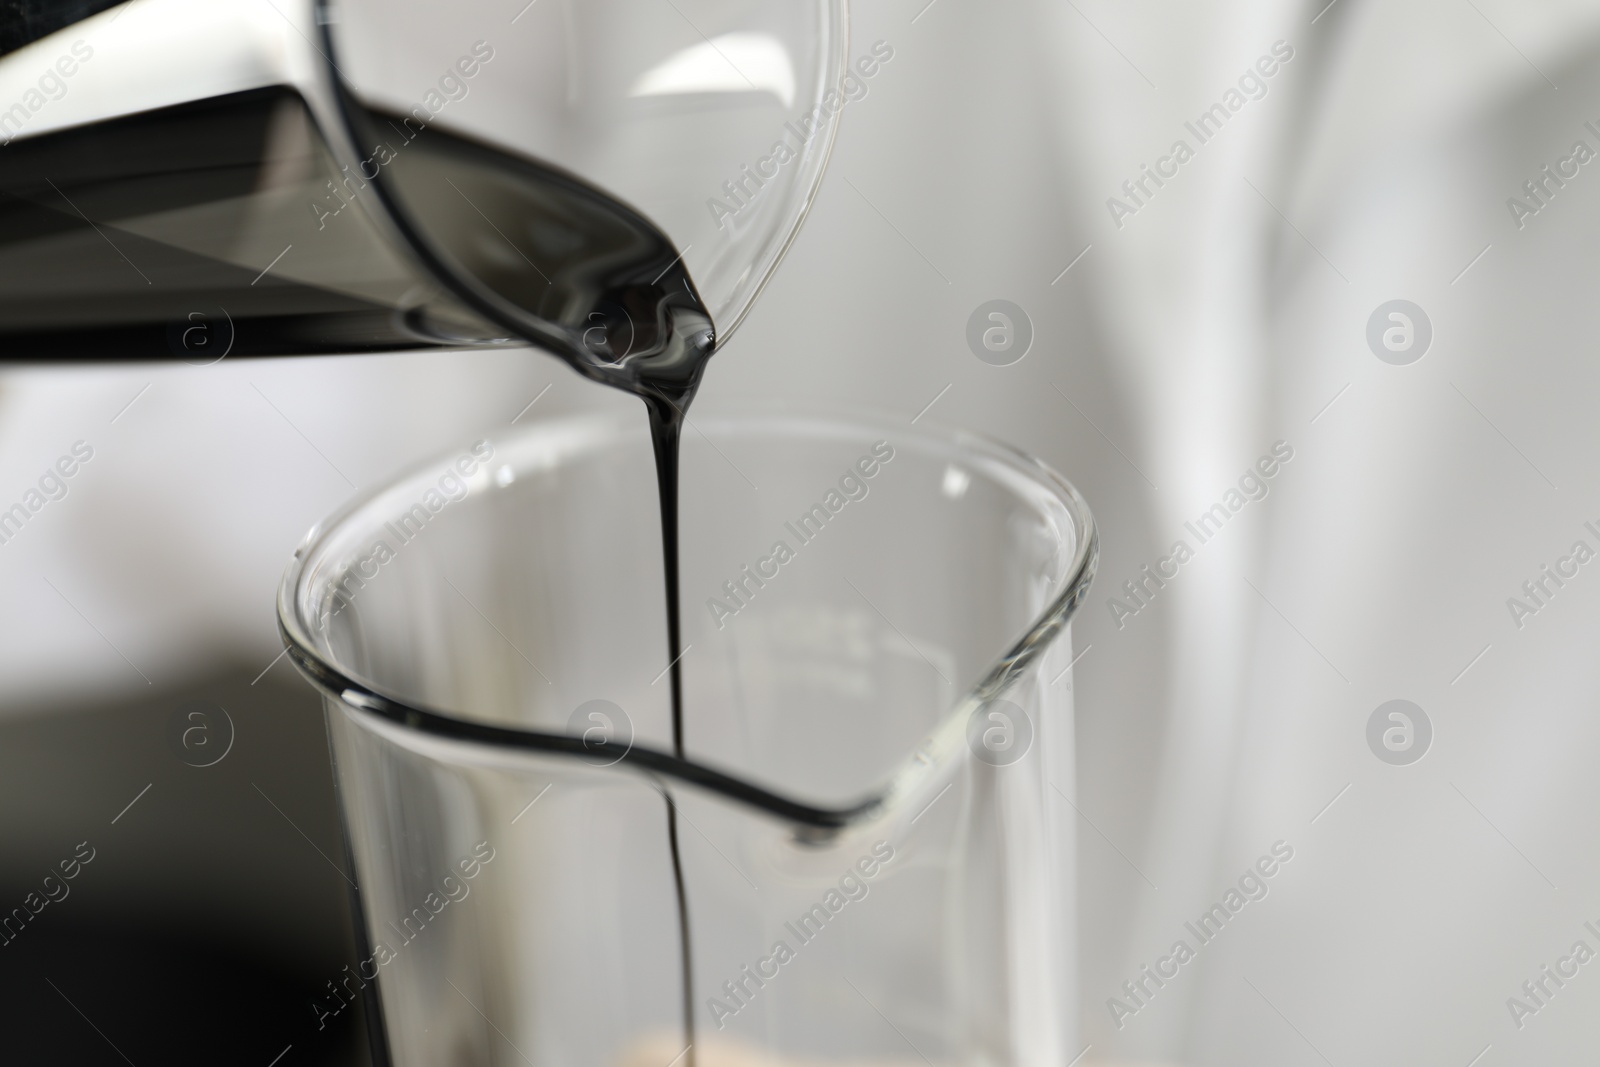 Photo of Pouring crude oil into beaker against blurred background, closeup